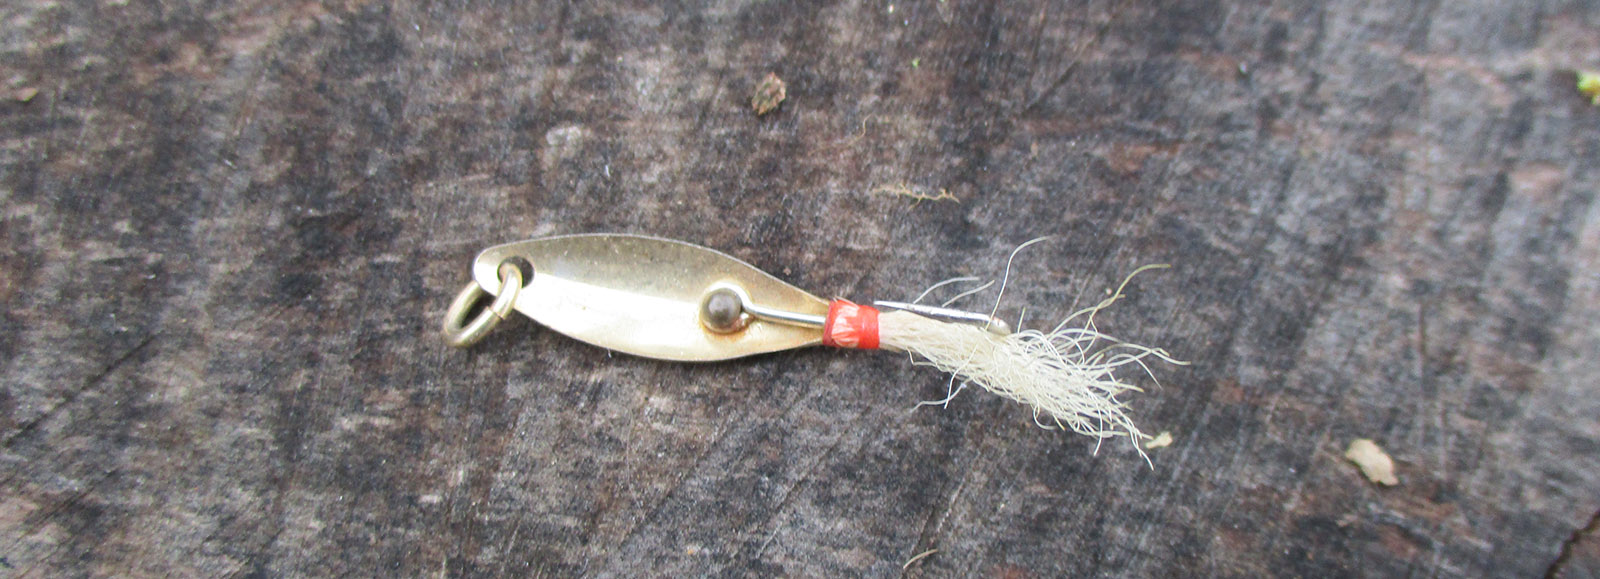 A photo of a spoon-shaped metal fishing lure with a white, fuzzy tail. 